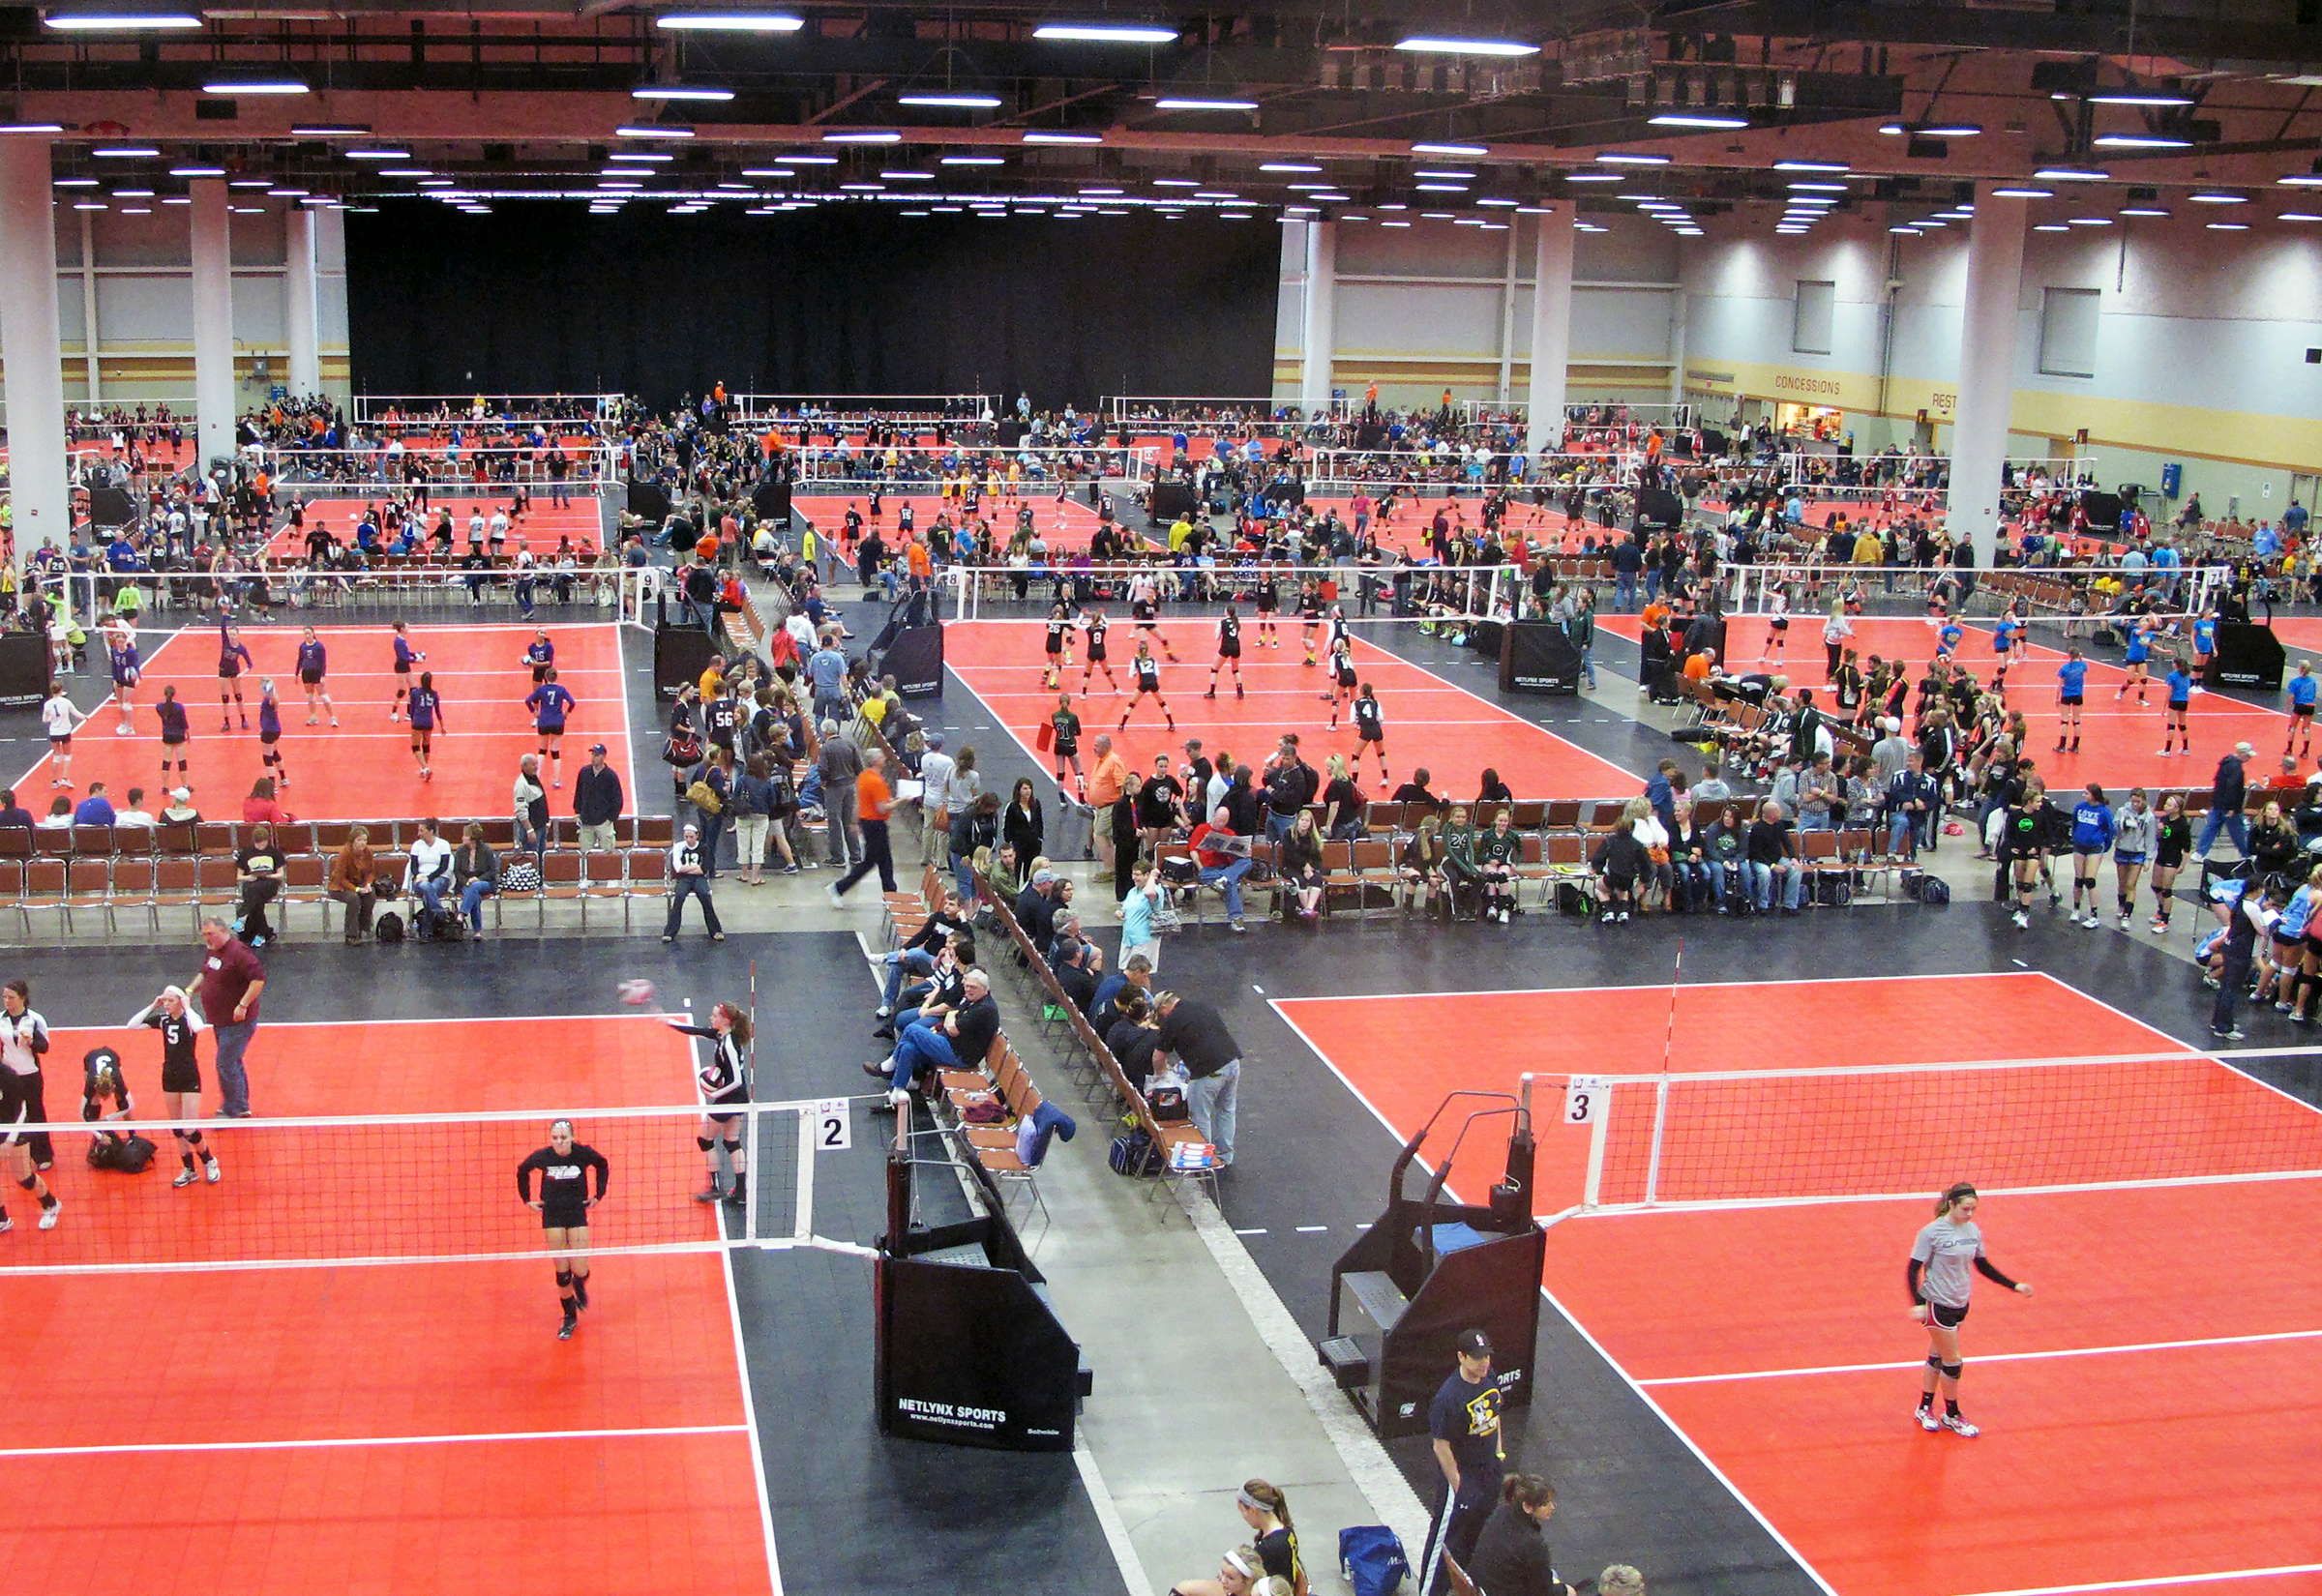 Volleyball tournament at the Iowa Events Center